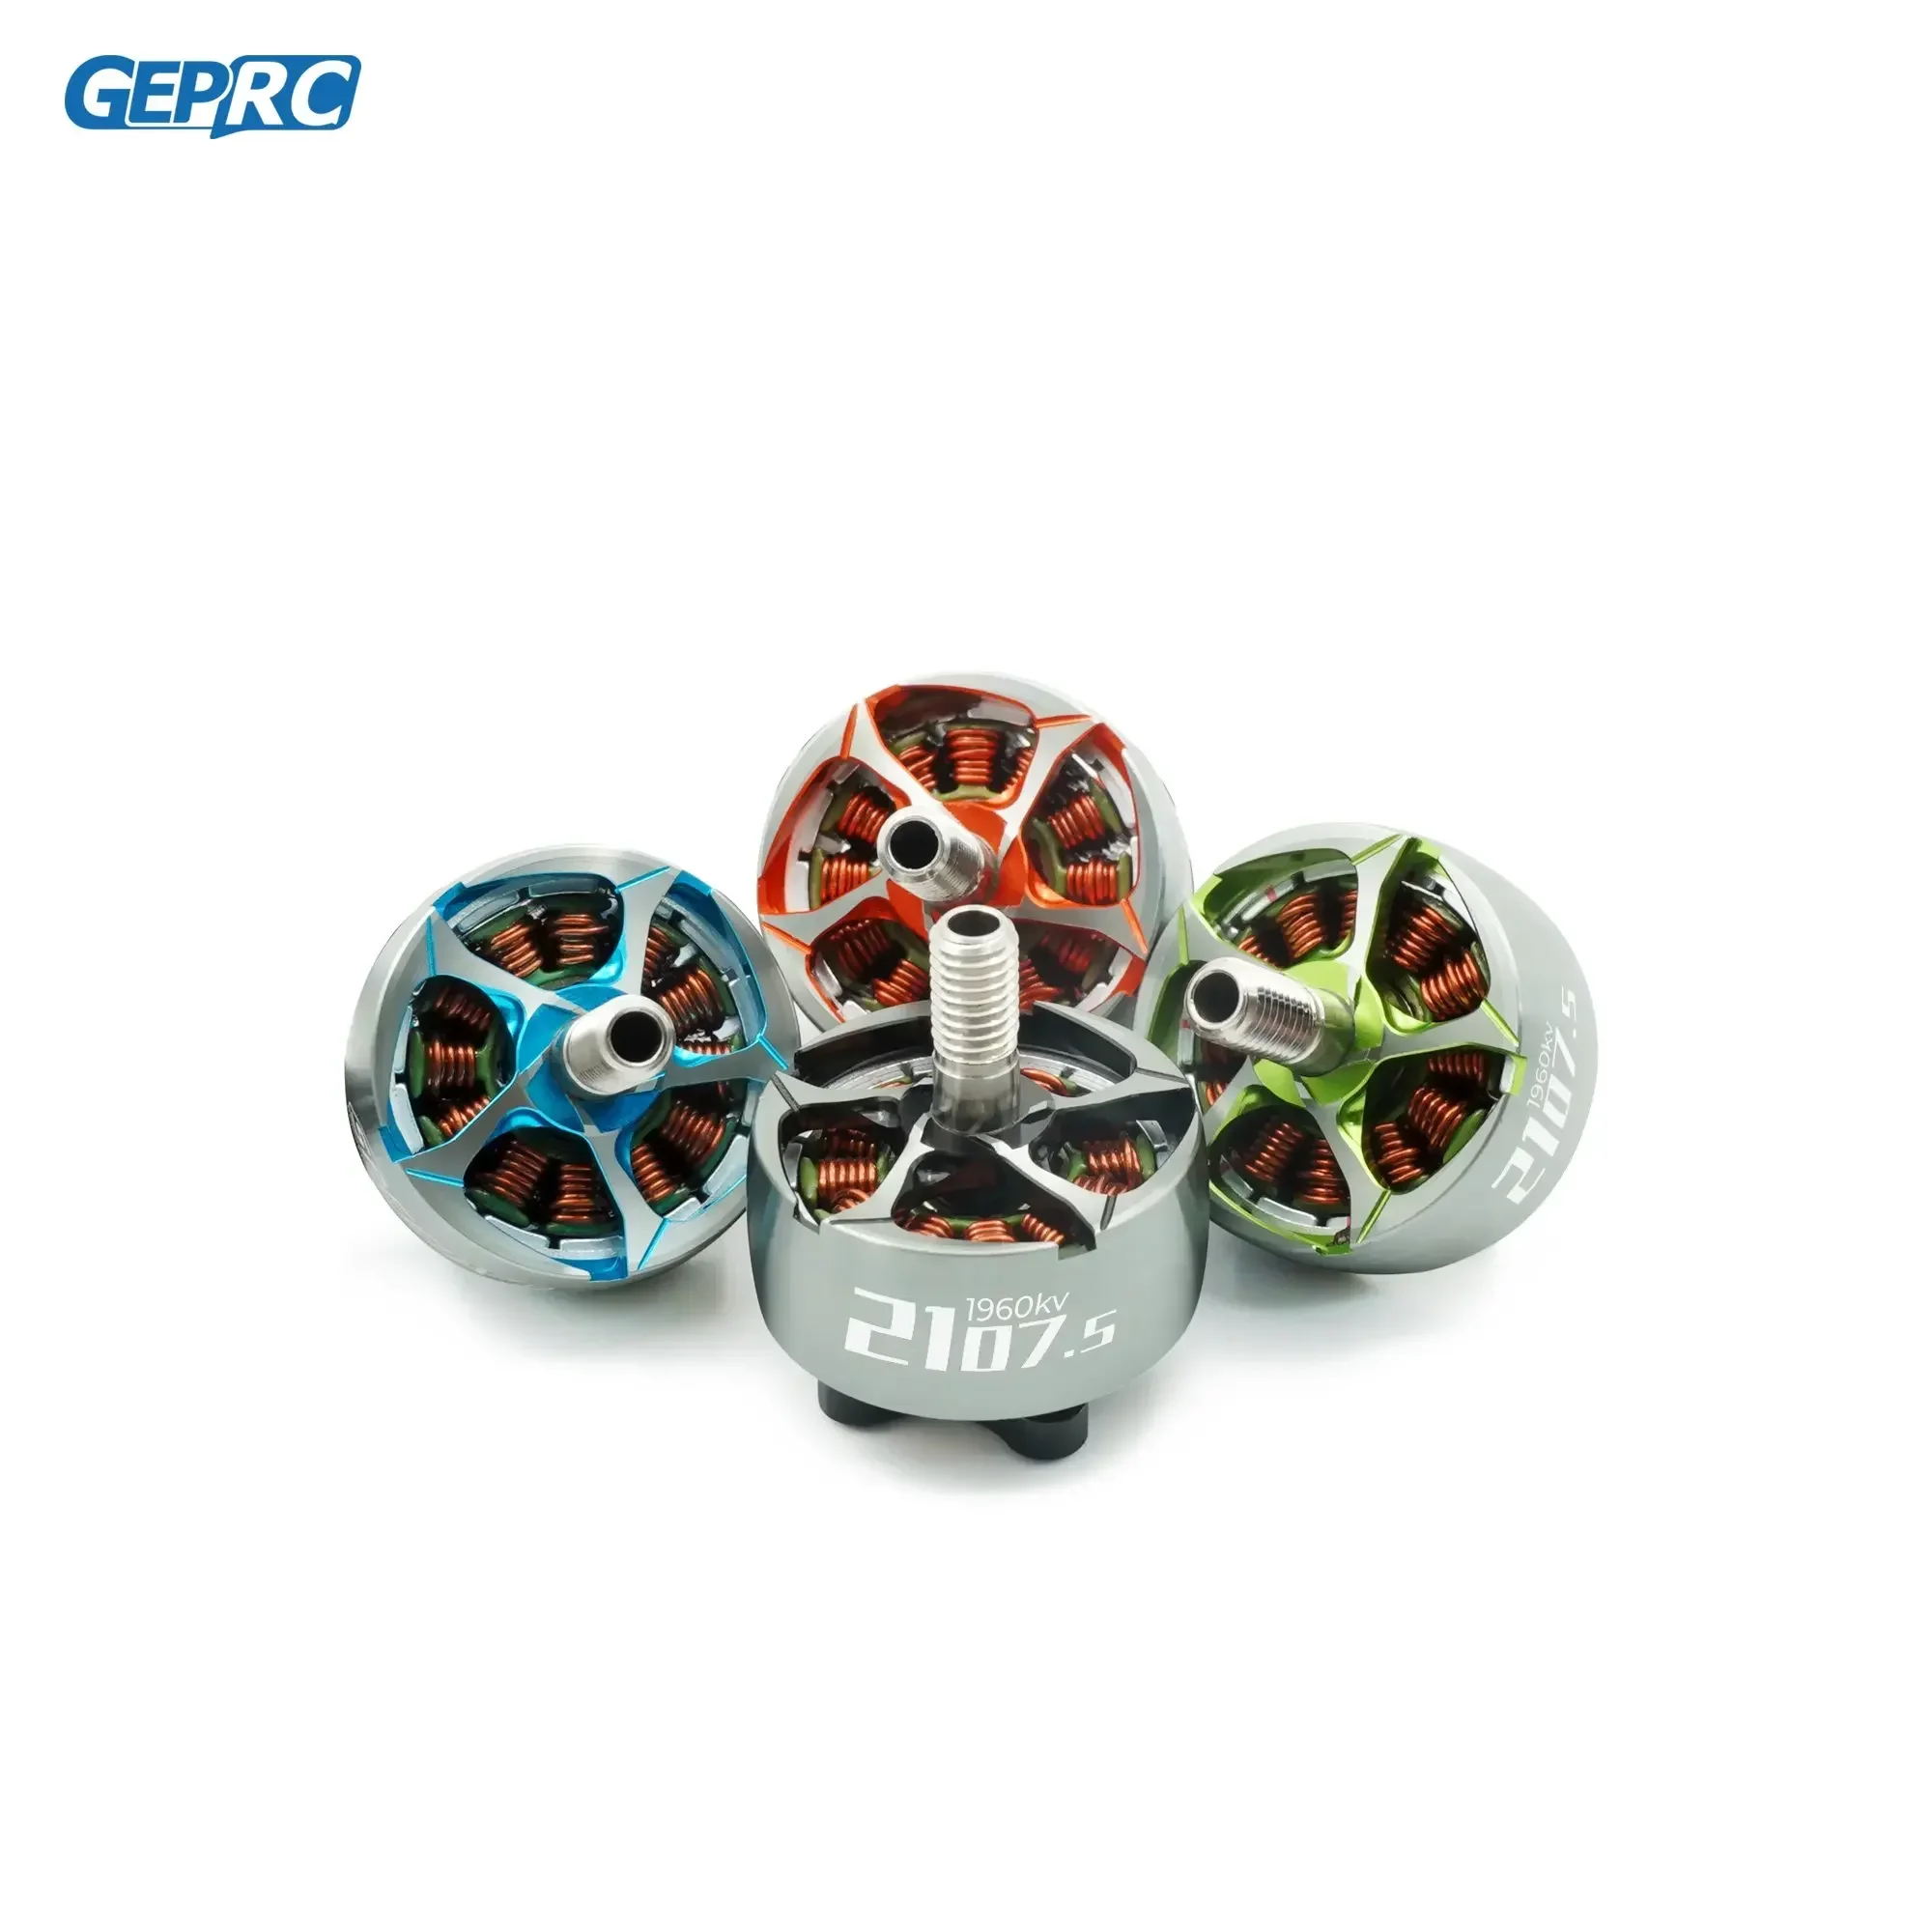 

GEPRC SPEEDX2 2107.5 1960KV/2450KV Motor Suitable For DIY RC FPV Quadcopter Freestyle Racing Drone Accessories Replacement Parts